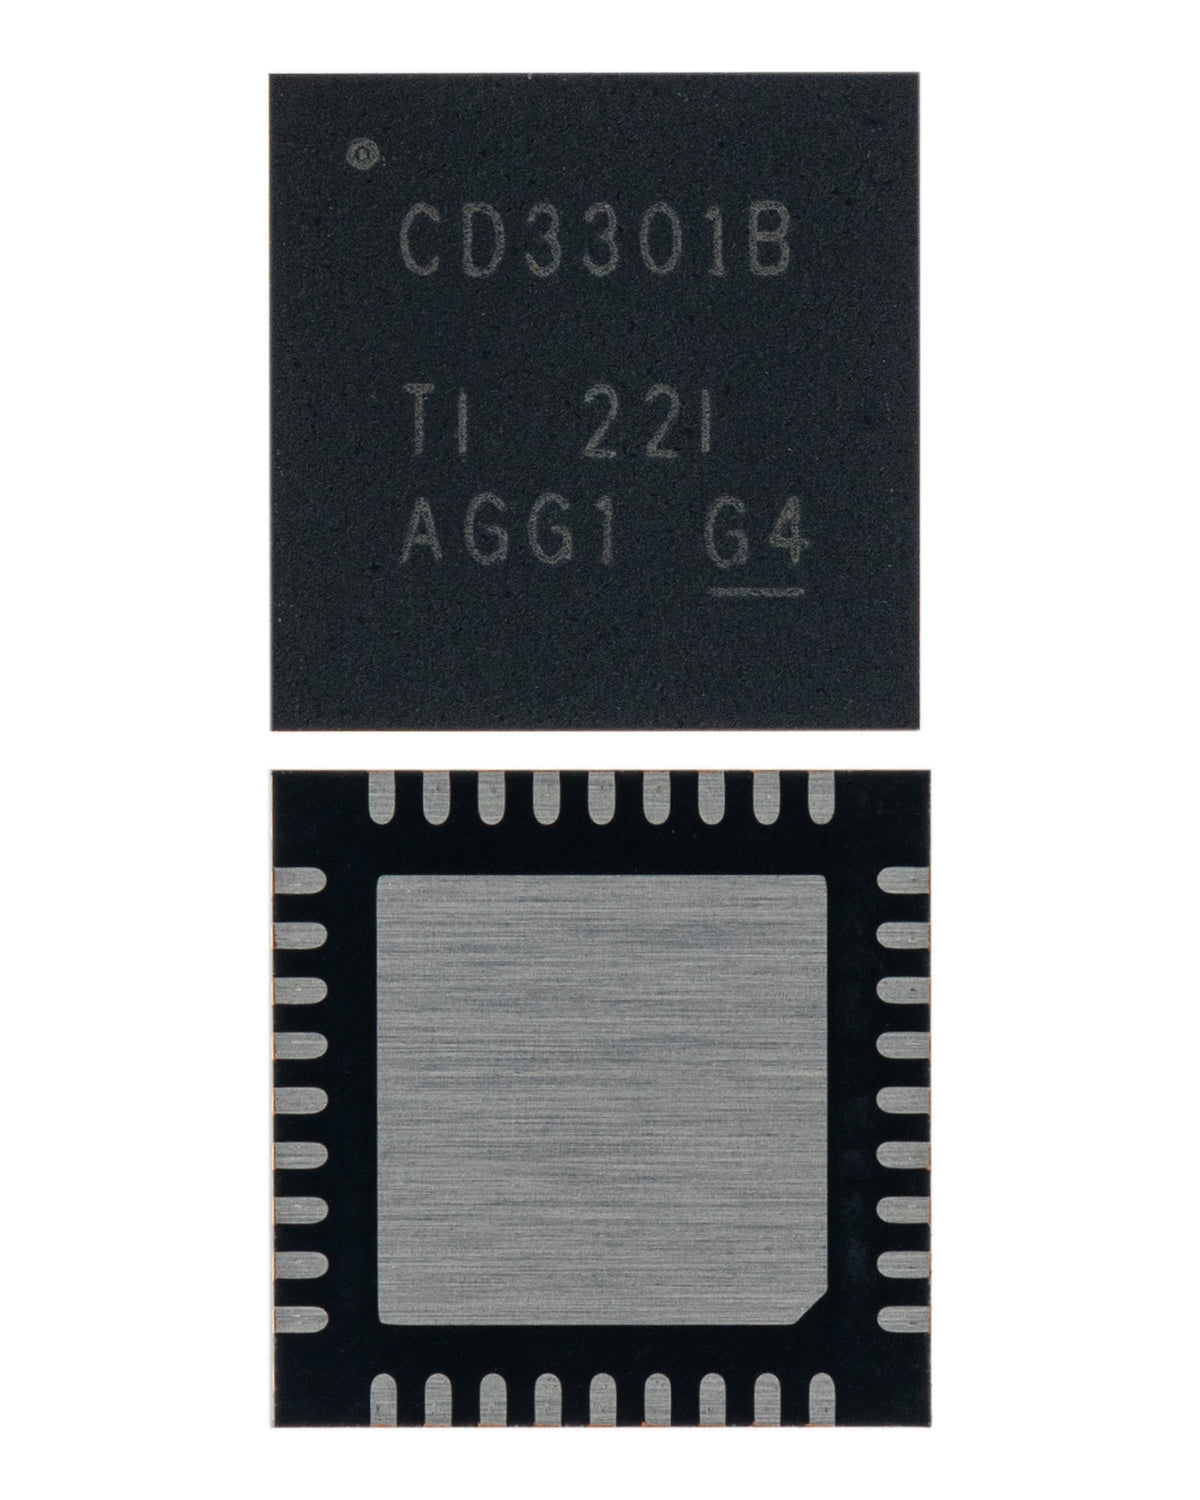 POWER CONTROLLER IC COMPATIBLE WITH NOTEBOOKS / MACBOOKS (CD3301BRHHR / CD3301B: QFN-36 PIN)